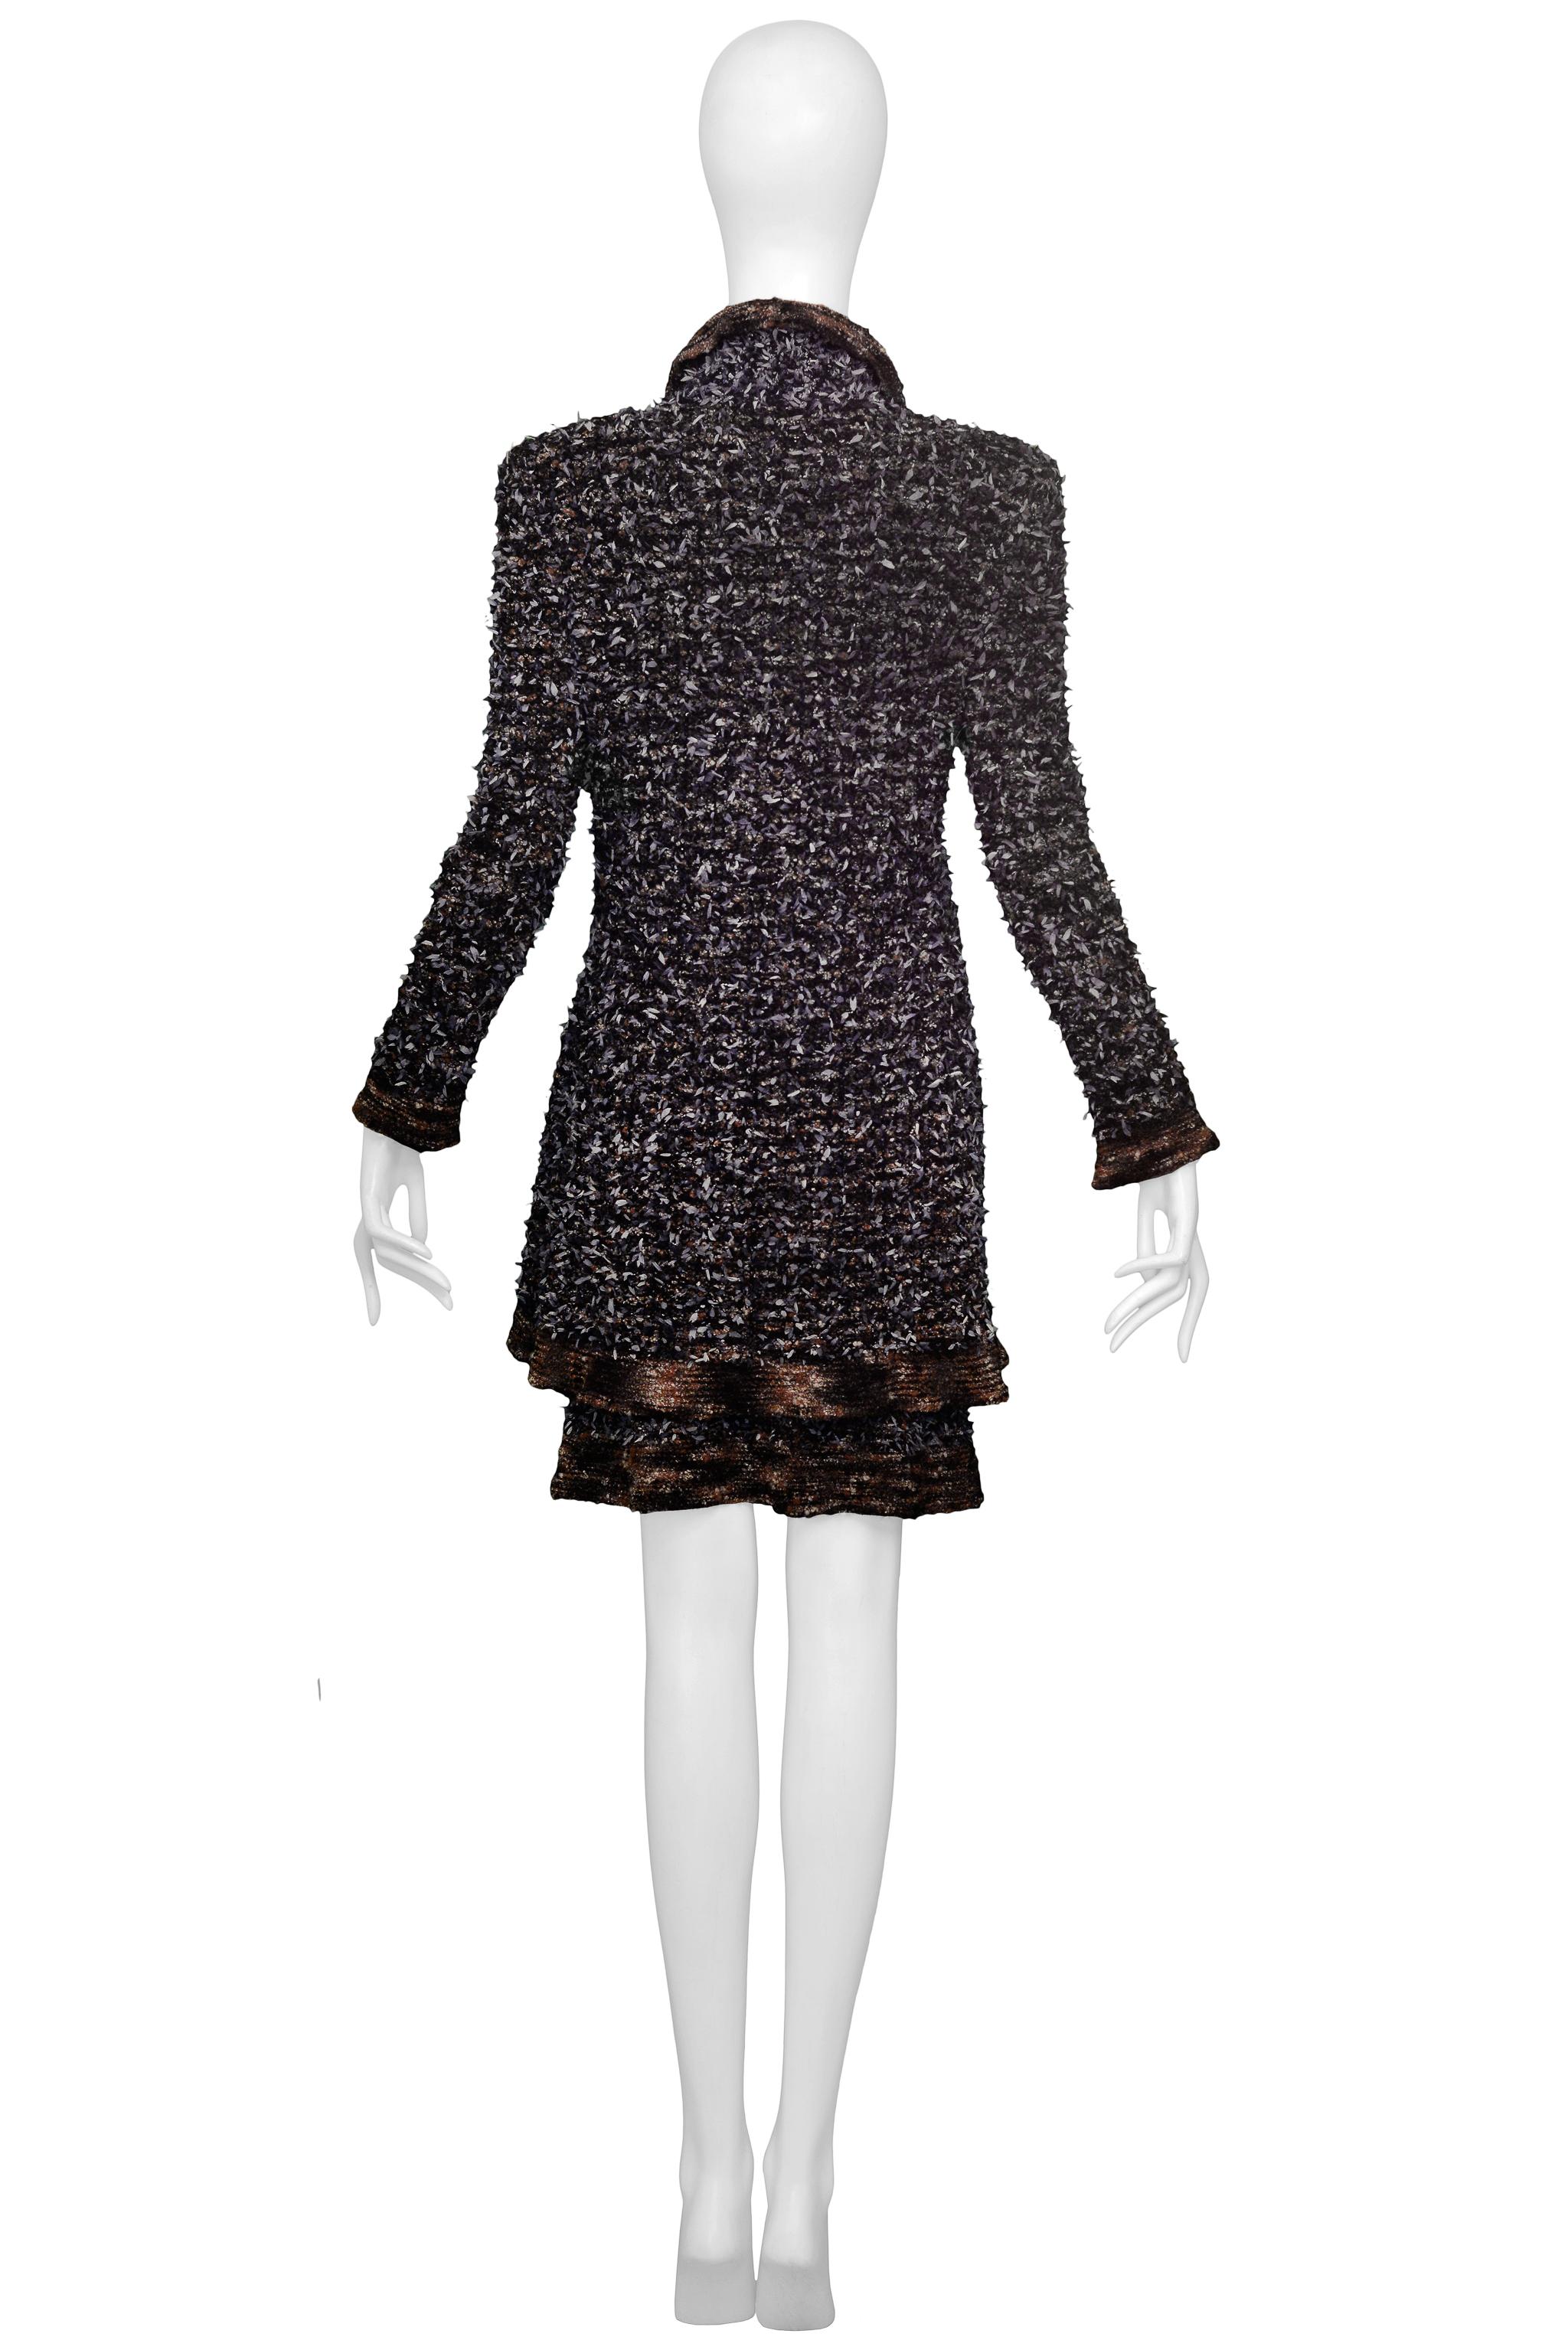 Women's Chanel 1997 Black, Brown, and Grey Sweater Skirt Suit Ensemble